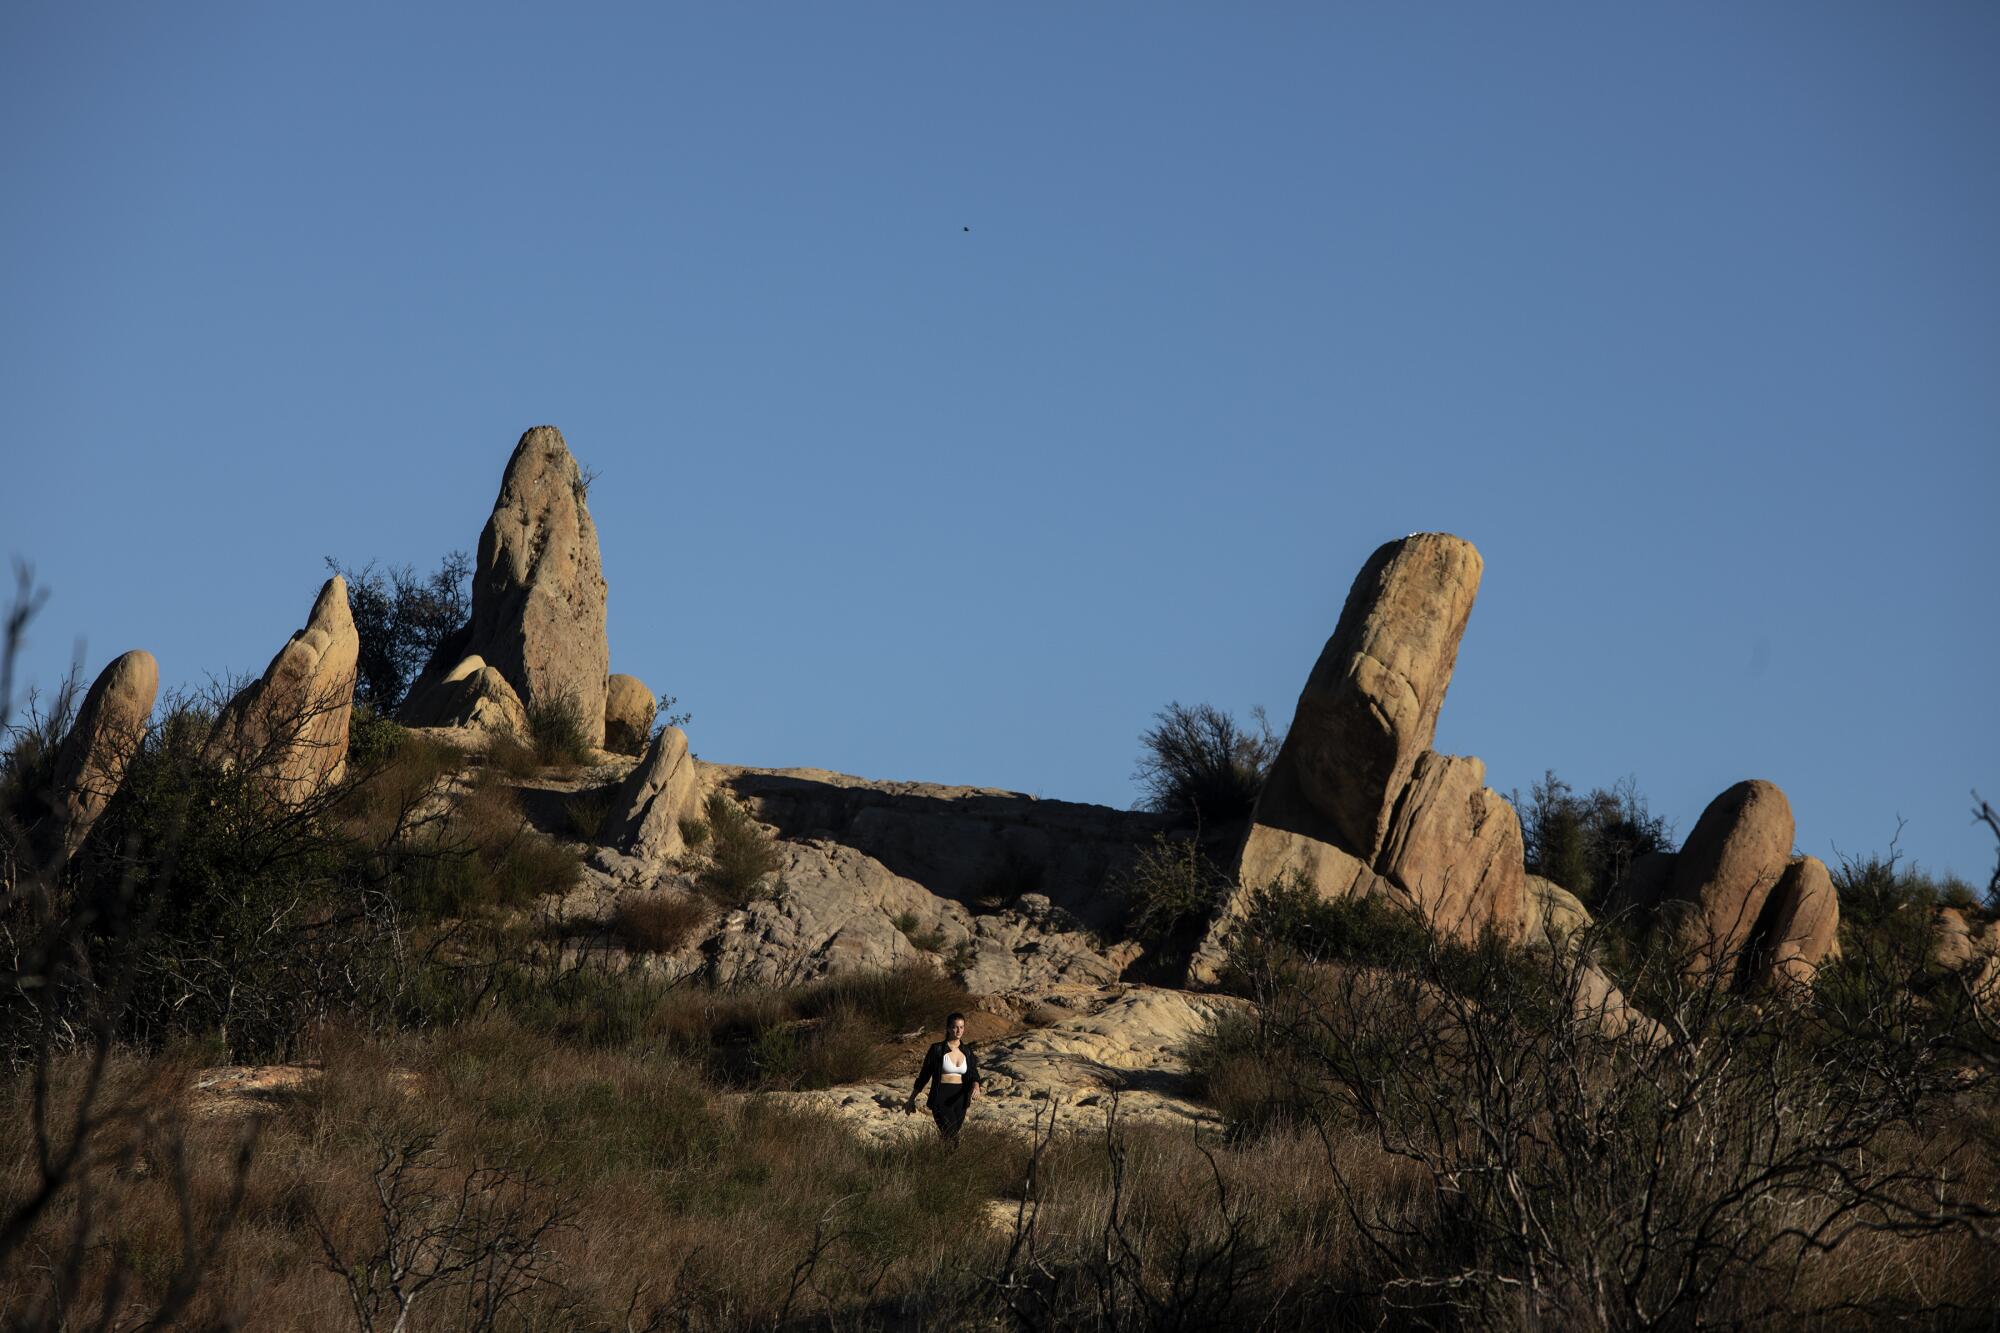 A hiker walks through interesting rock formations along the Backbone Trail in Corral Canyon.